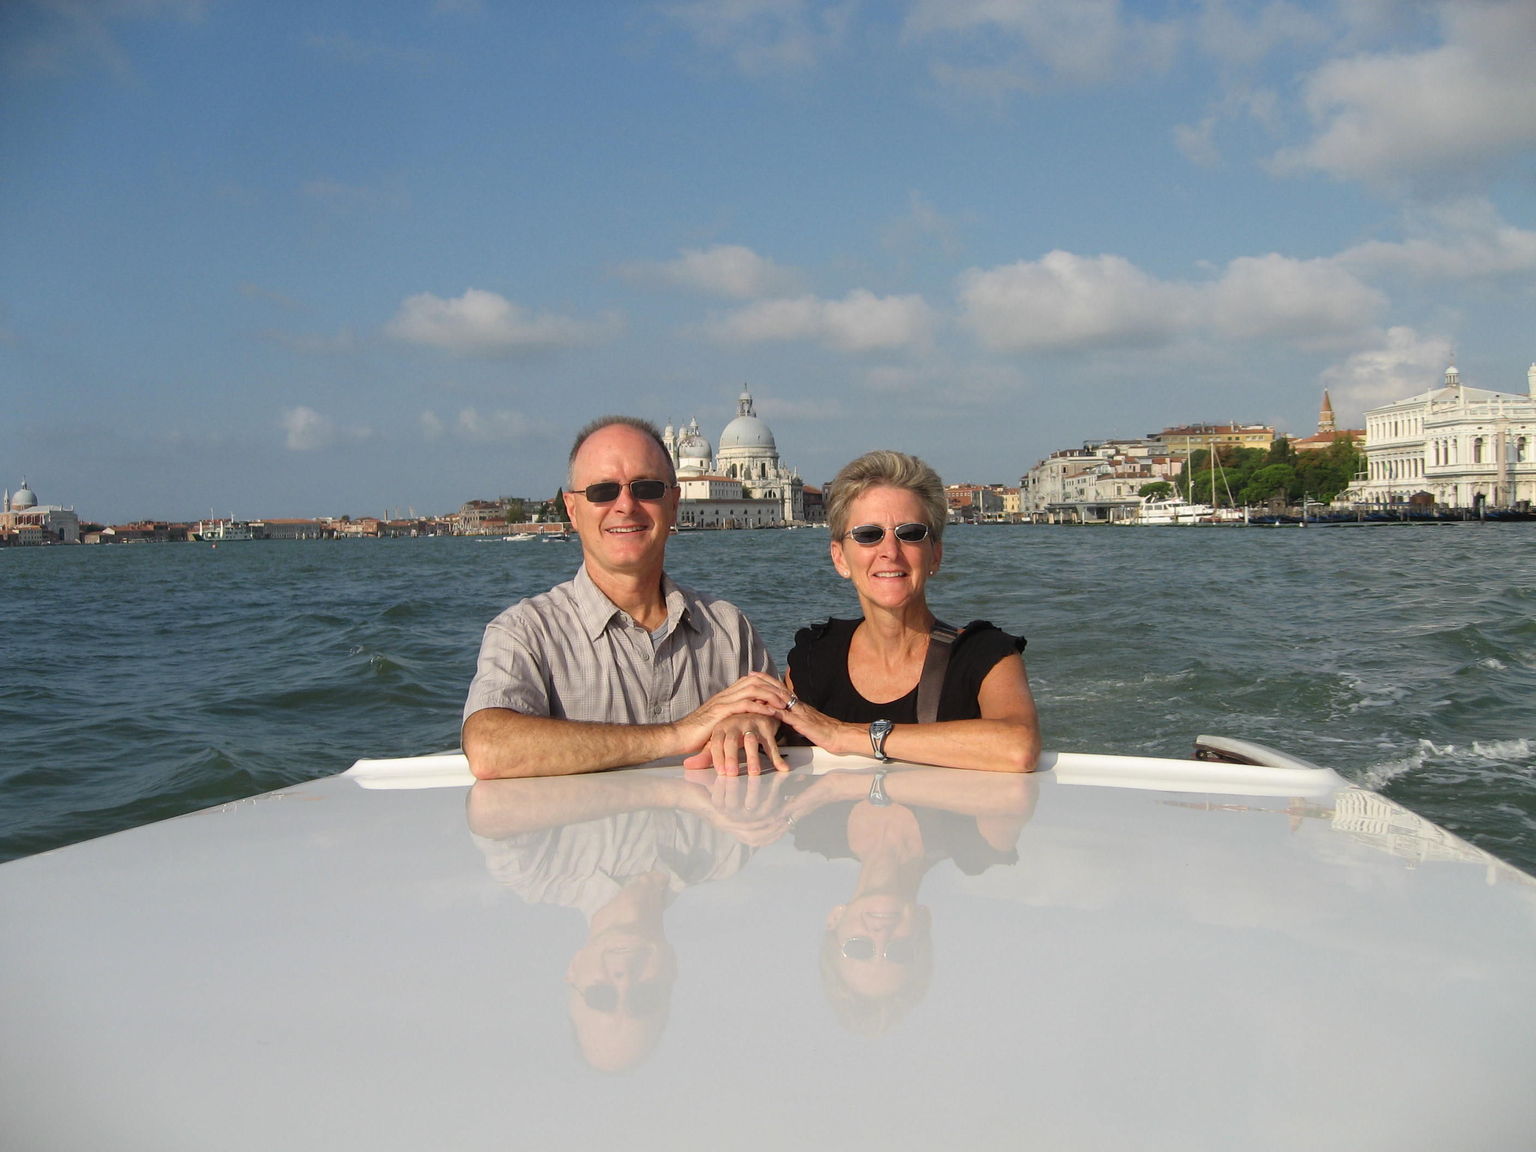 Leaving Venice by private water taxi